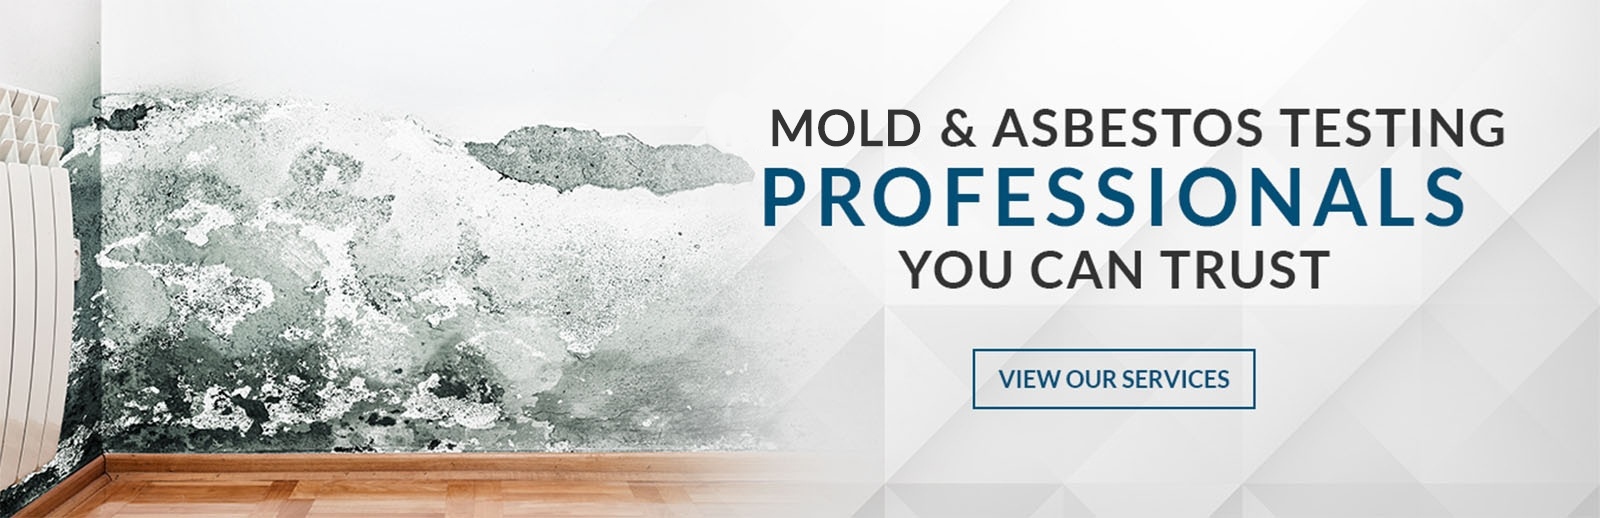 Elementary Property Inspections - Mold Inspection Services in Niagara, ON